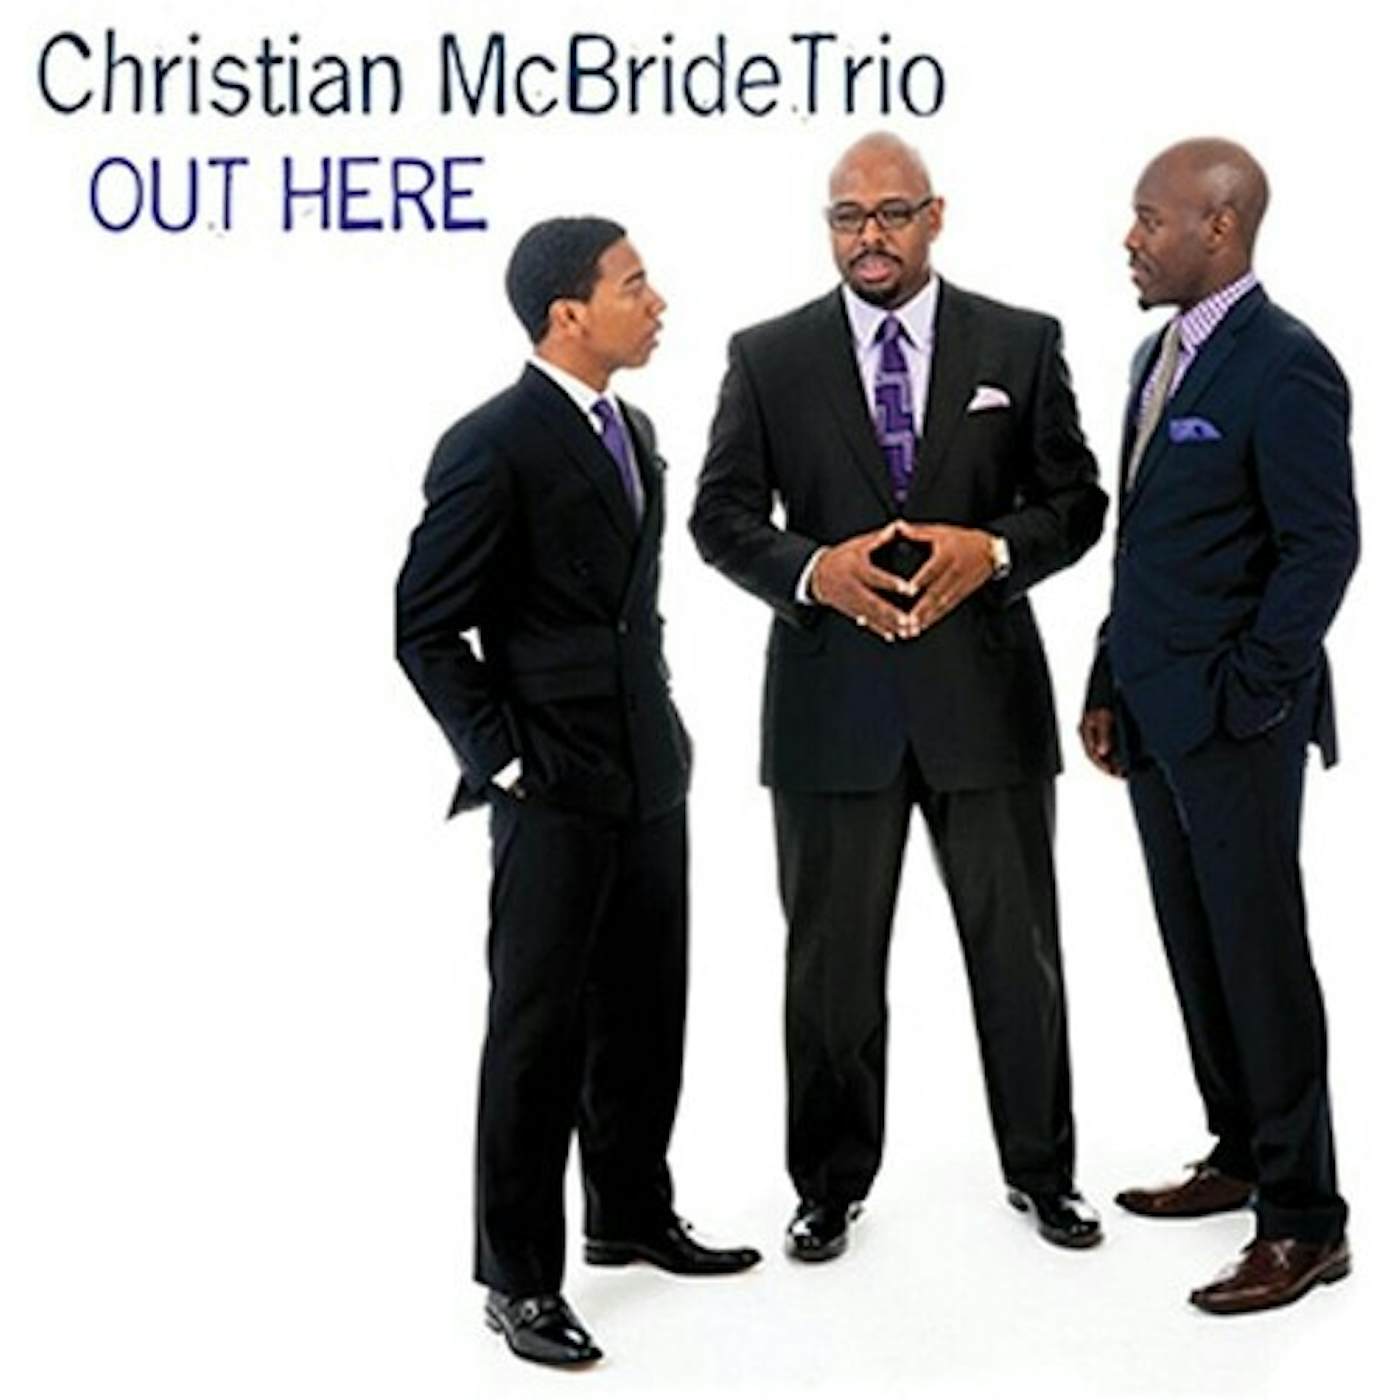 Christian McBride OUT HERE Vinyl Record